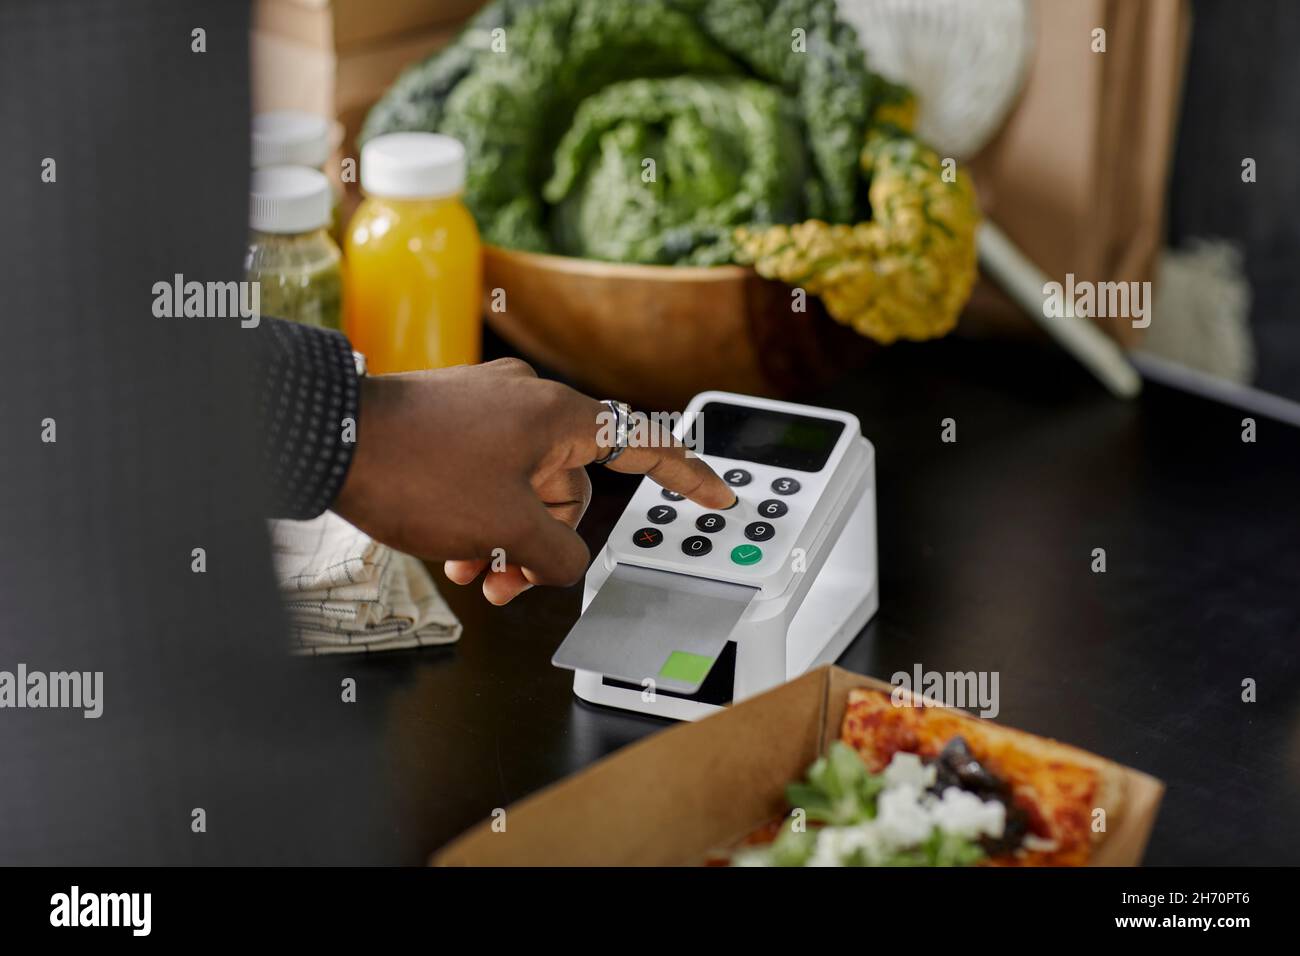 close-up of person using card reader Stock Photo